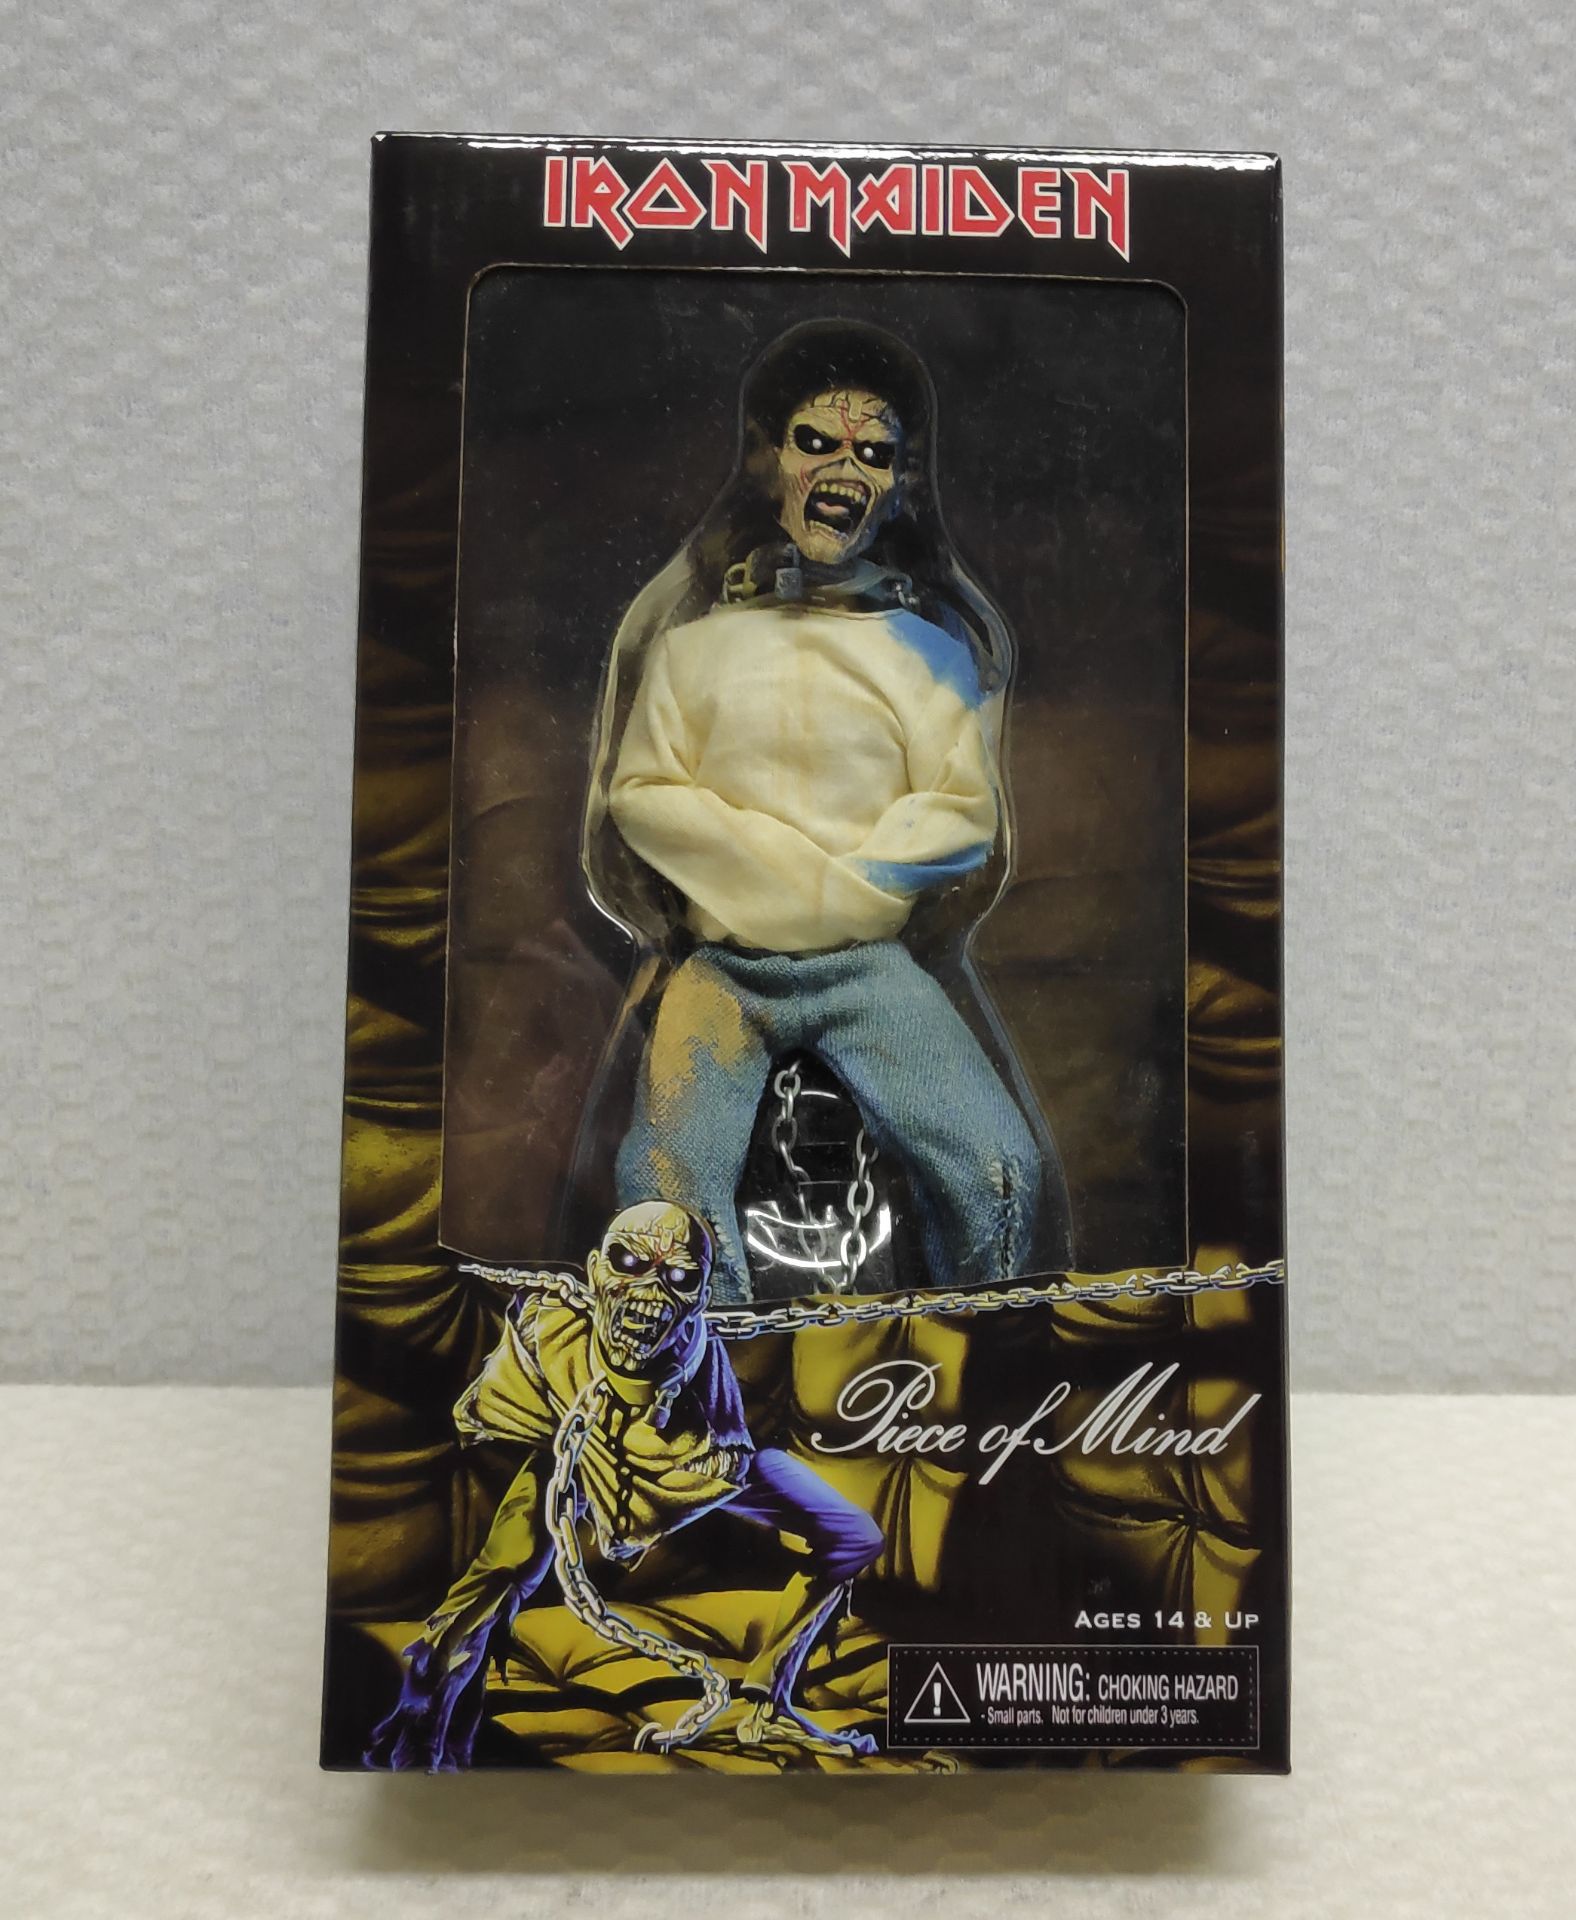 1 x Iron Maiden Eddie Piece of Mind NECA Action Figure - New/Boxed - HTYS166 - CL720 - Location: Alt - Image 8 of 11